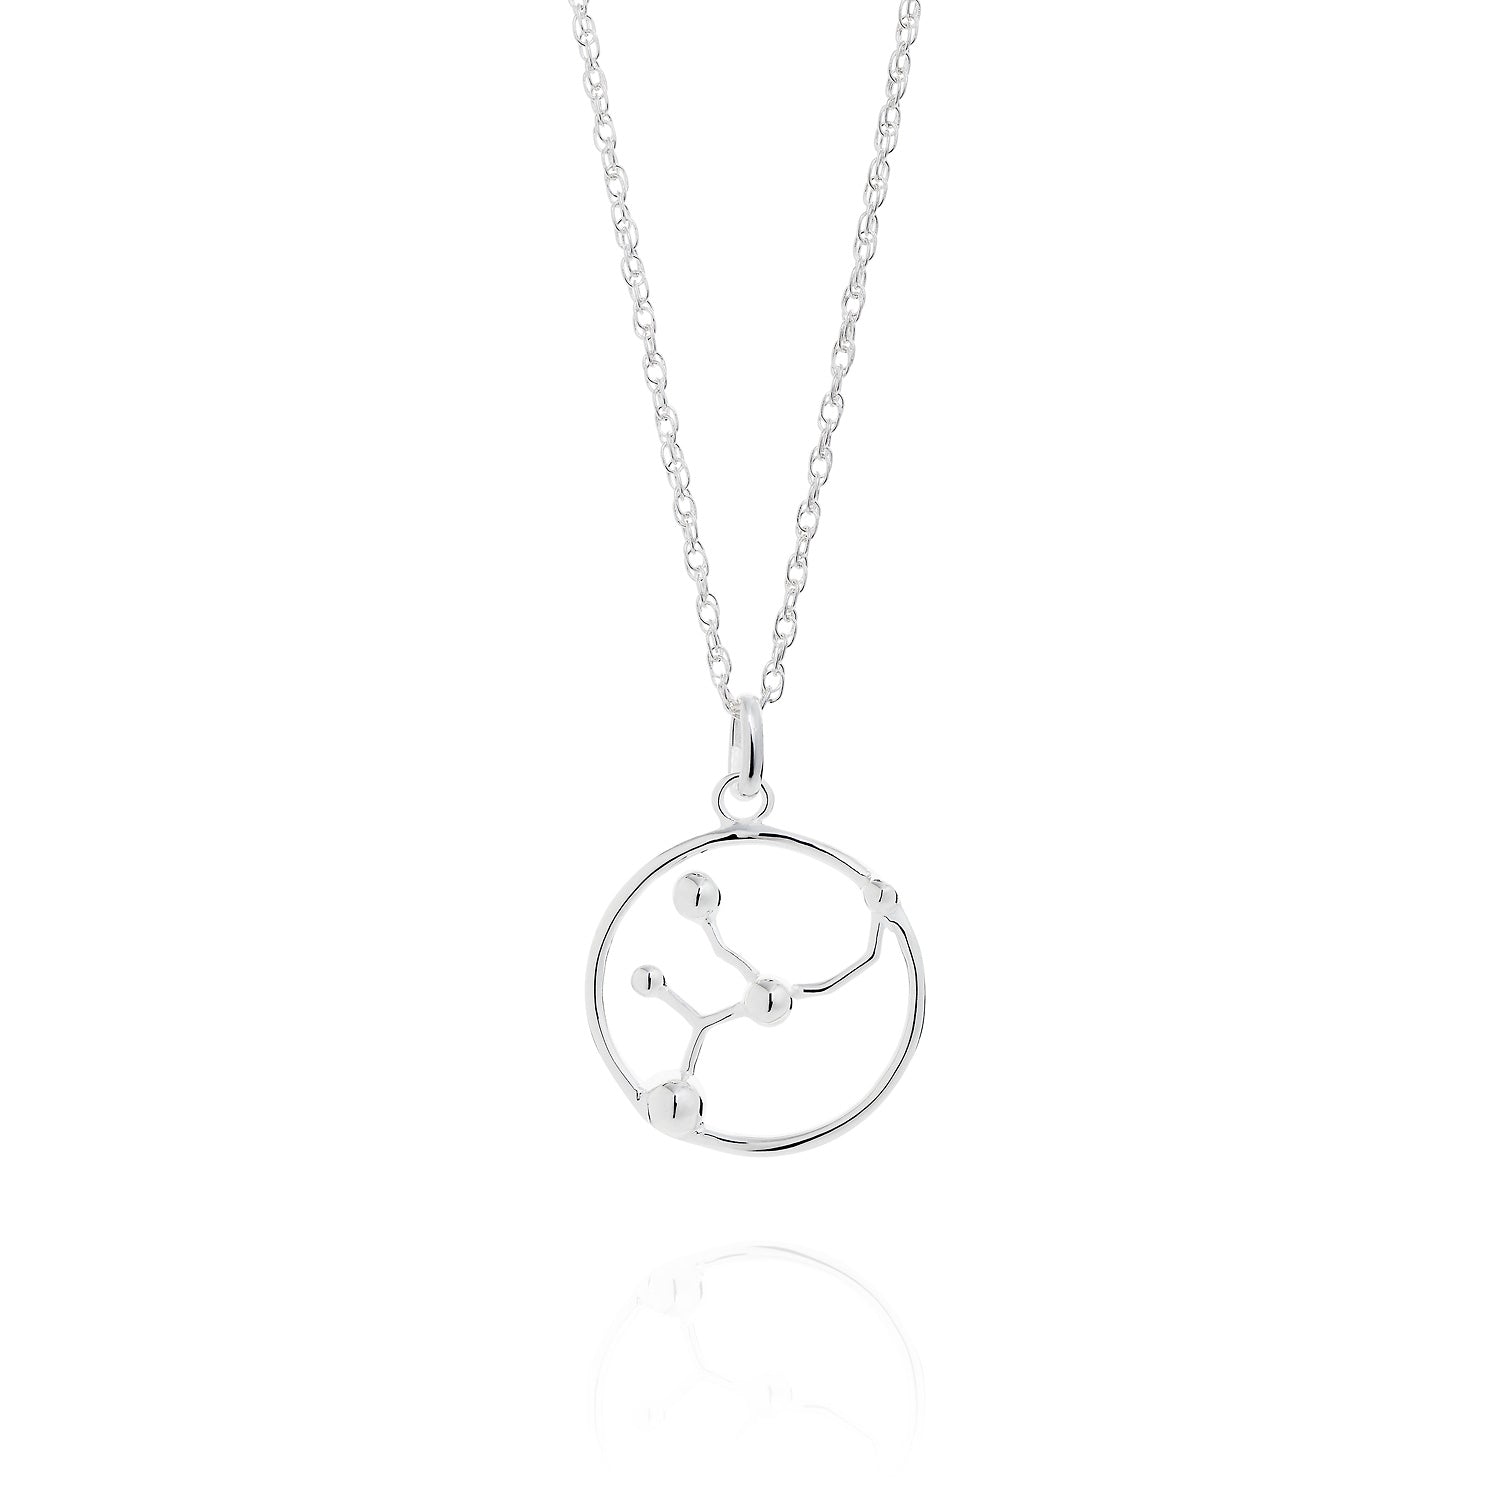 Star Sign Silver Necklace by Yasmin Everley